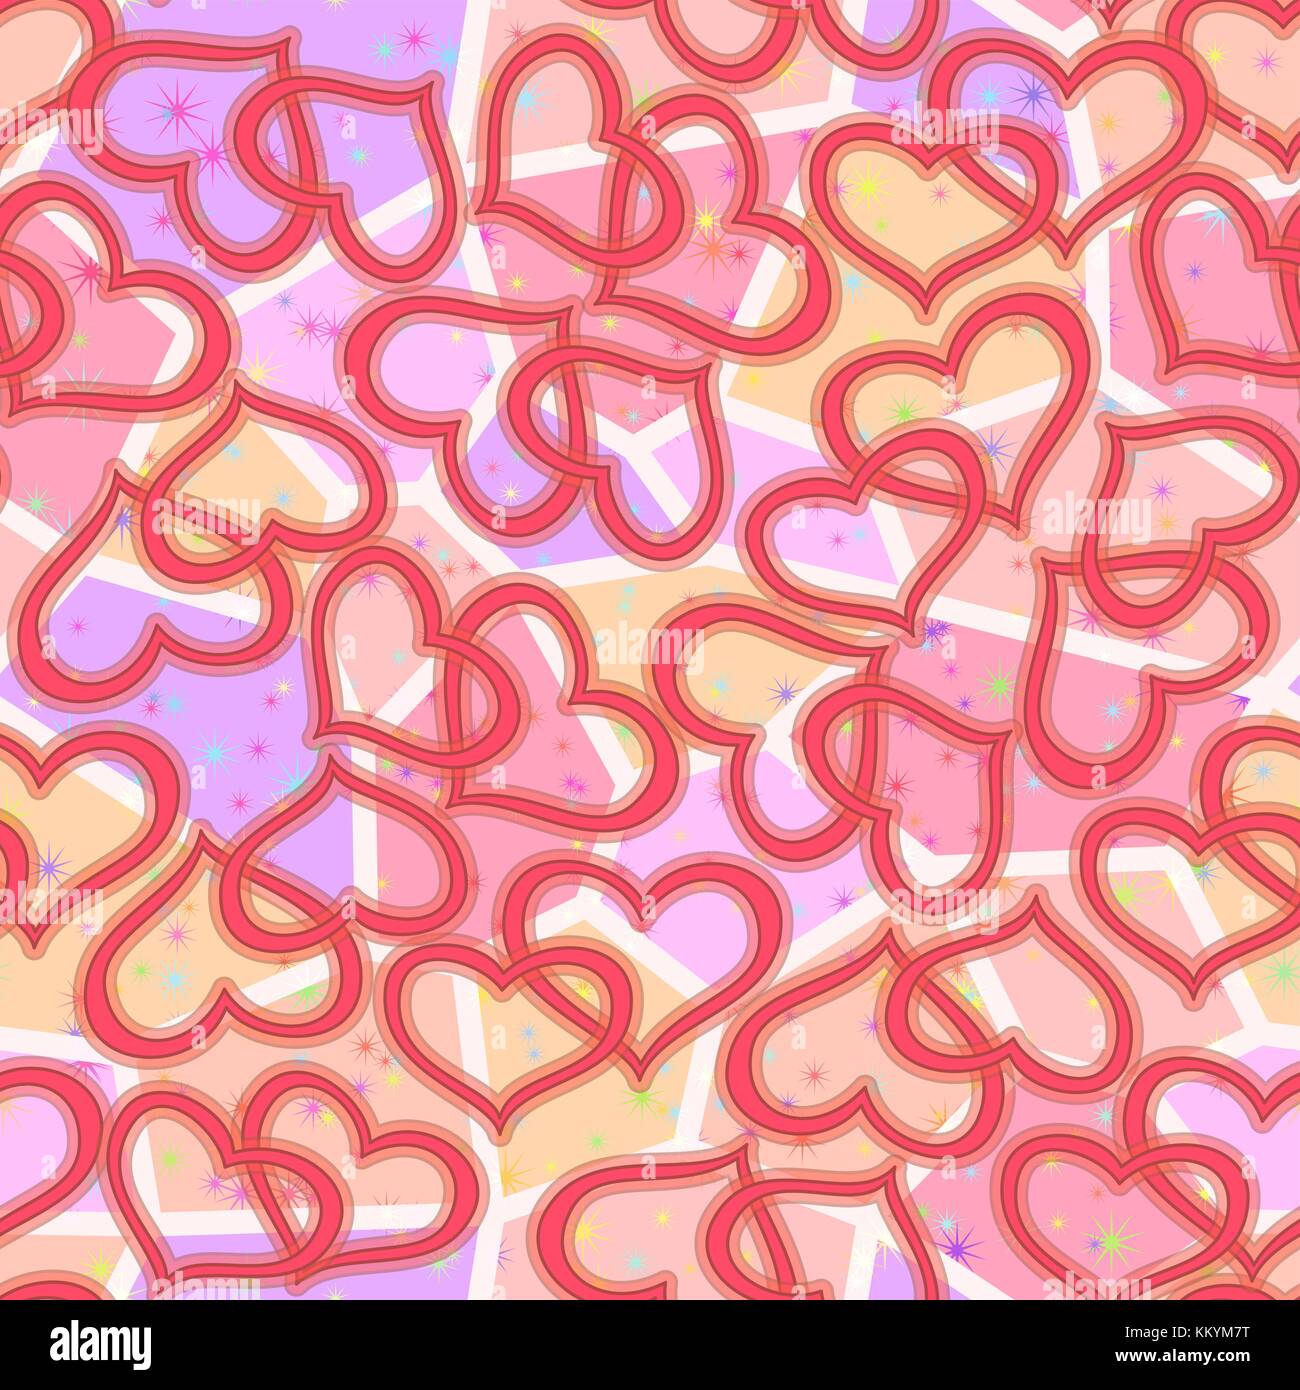 Seamless Background, Valentine Hearts Stock Vector